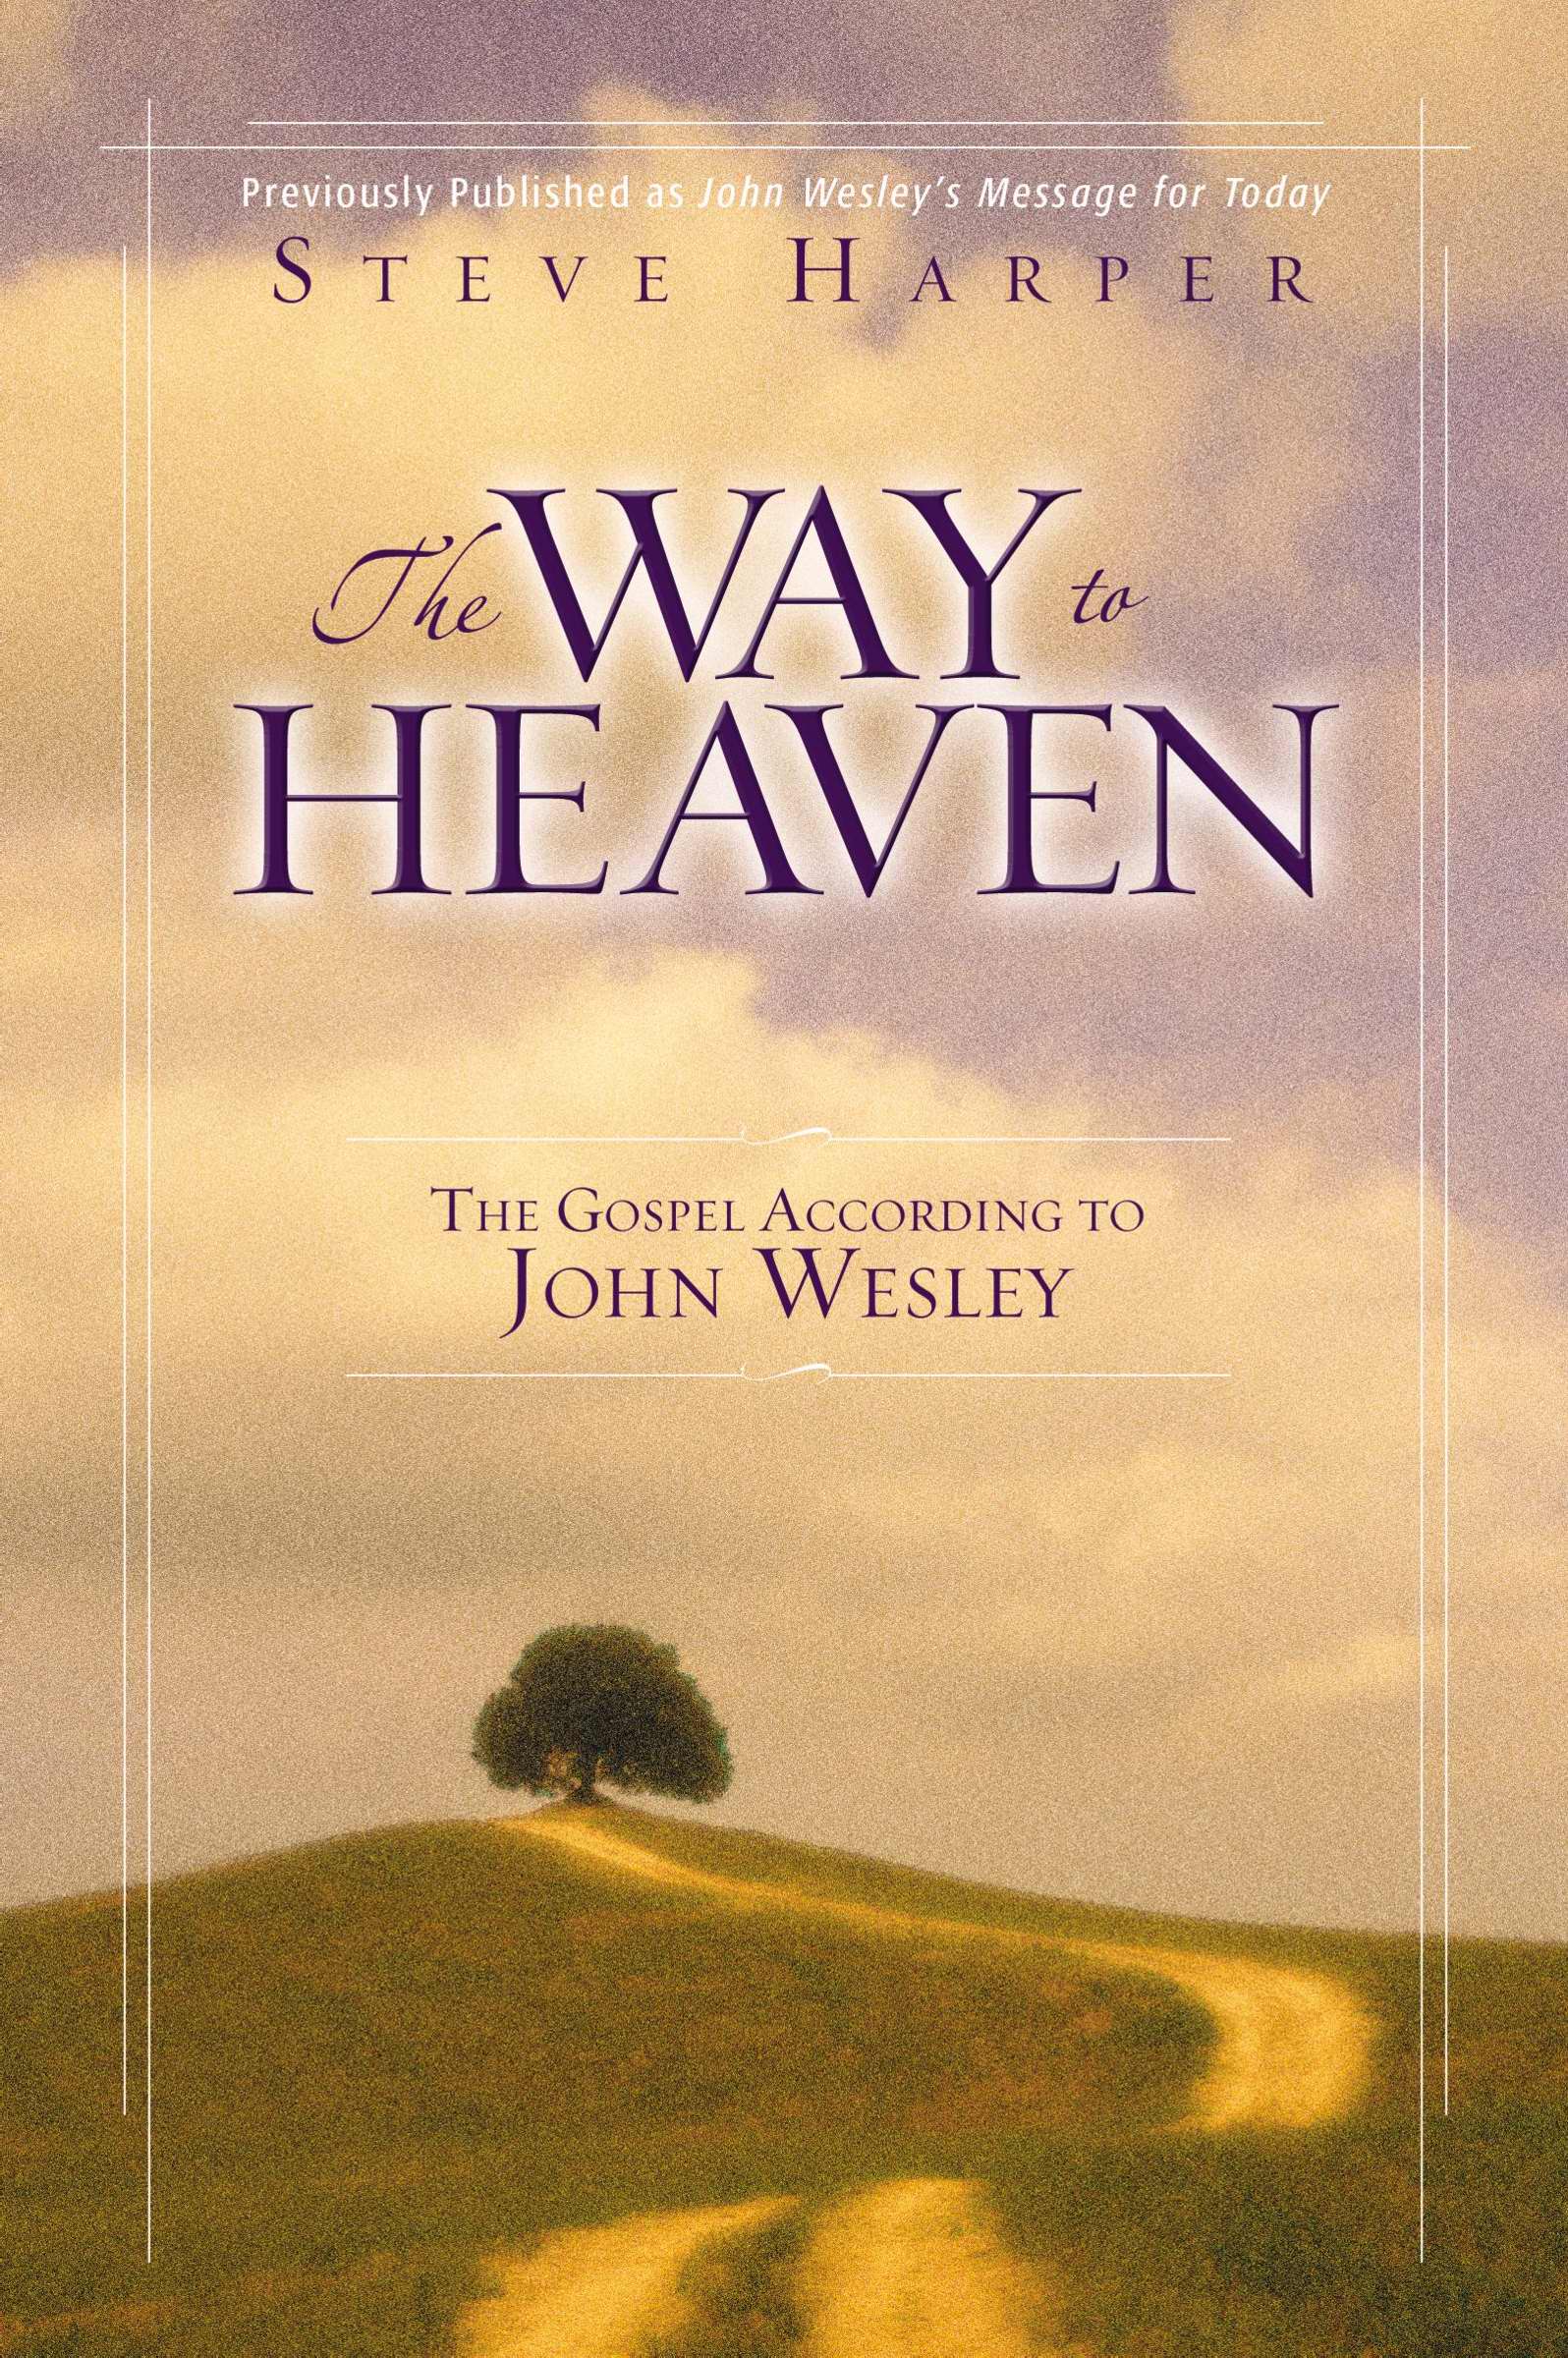 Image of The Way to Heaven: the Gospel According to John Wesley other